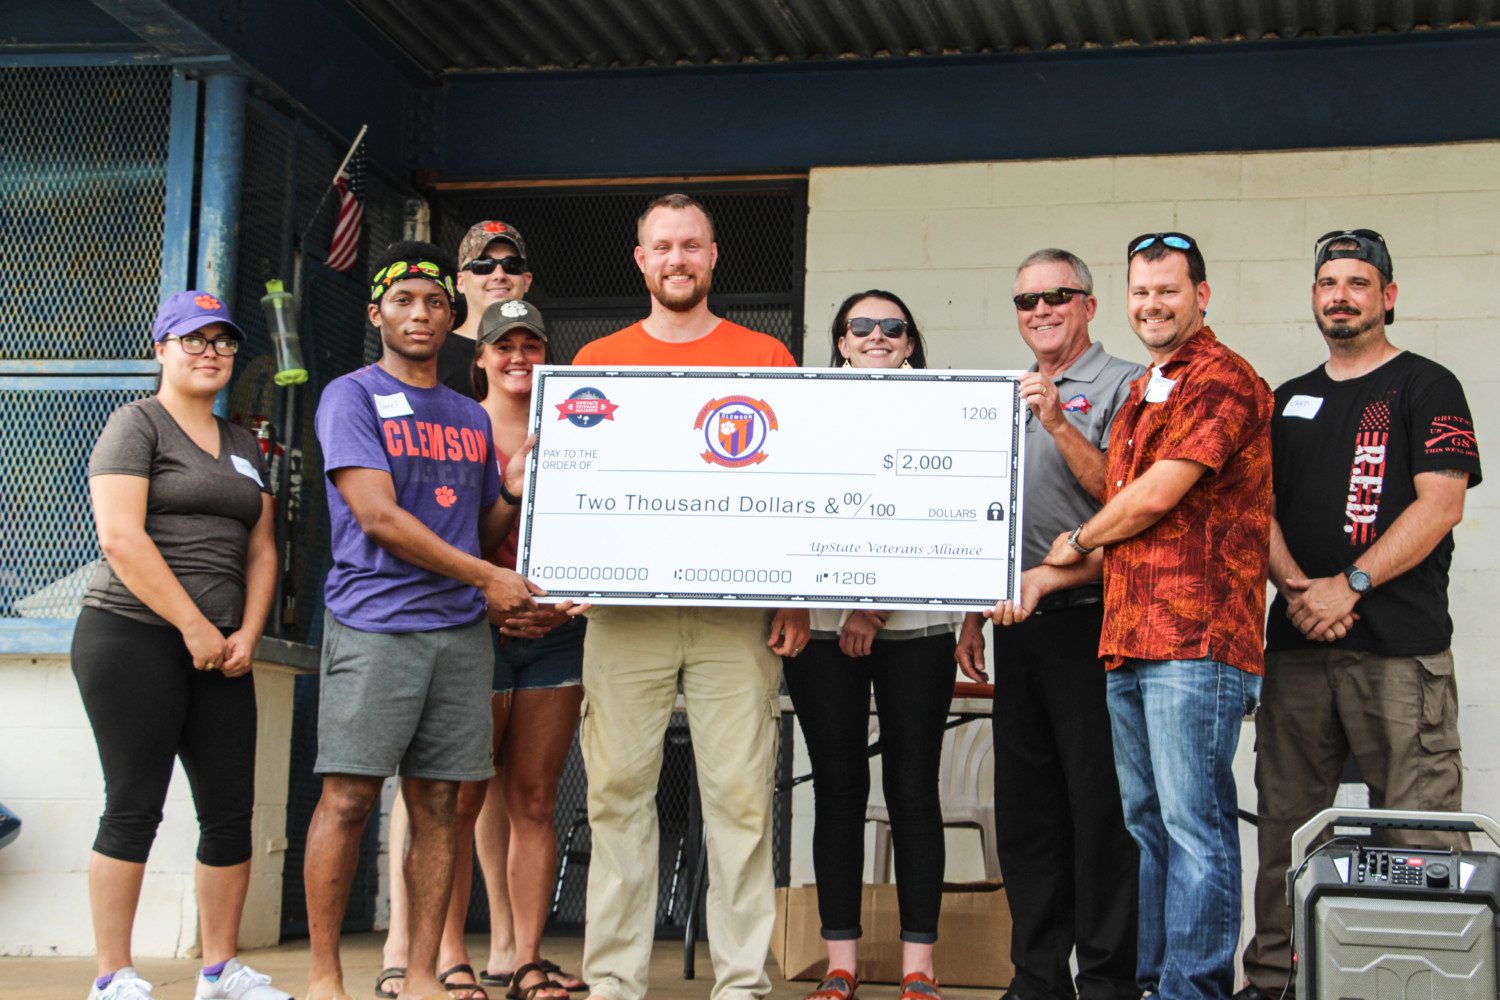 Members of the Upstate Veterans Alliance presented a check for $2,000 to support the scholarship endowment for Clemson student veterans.